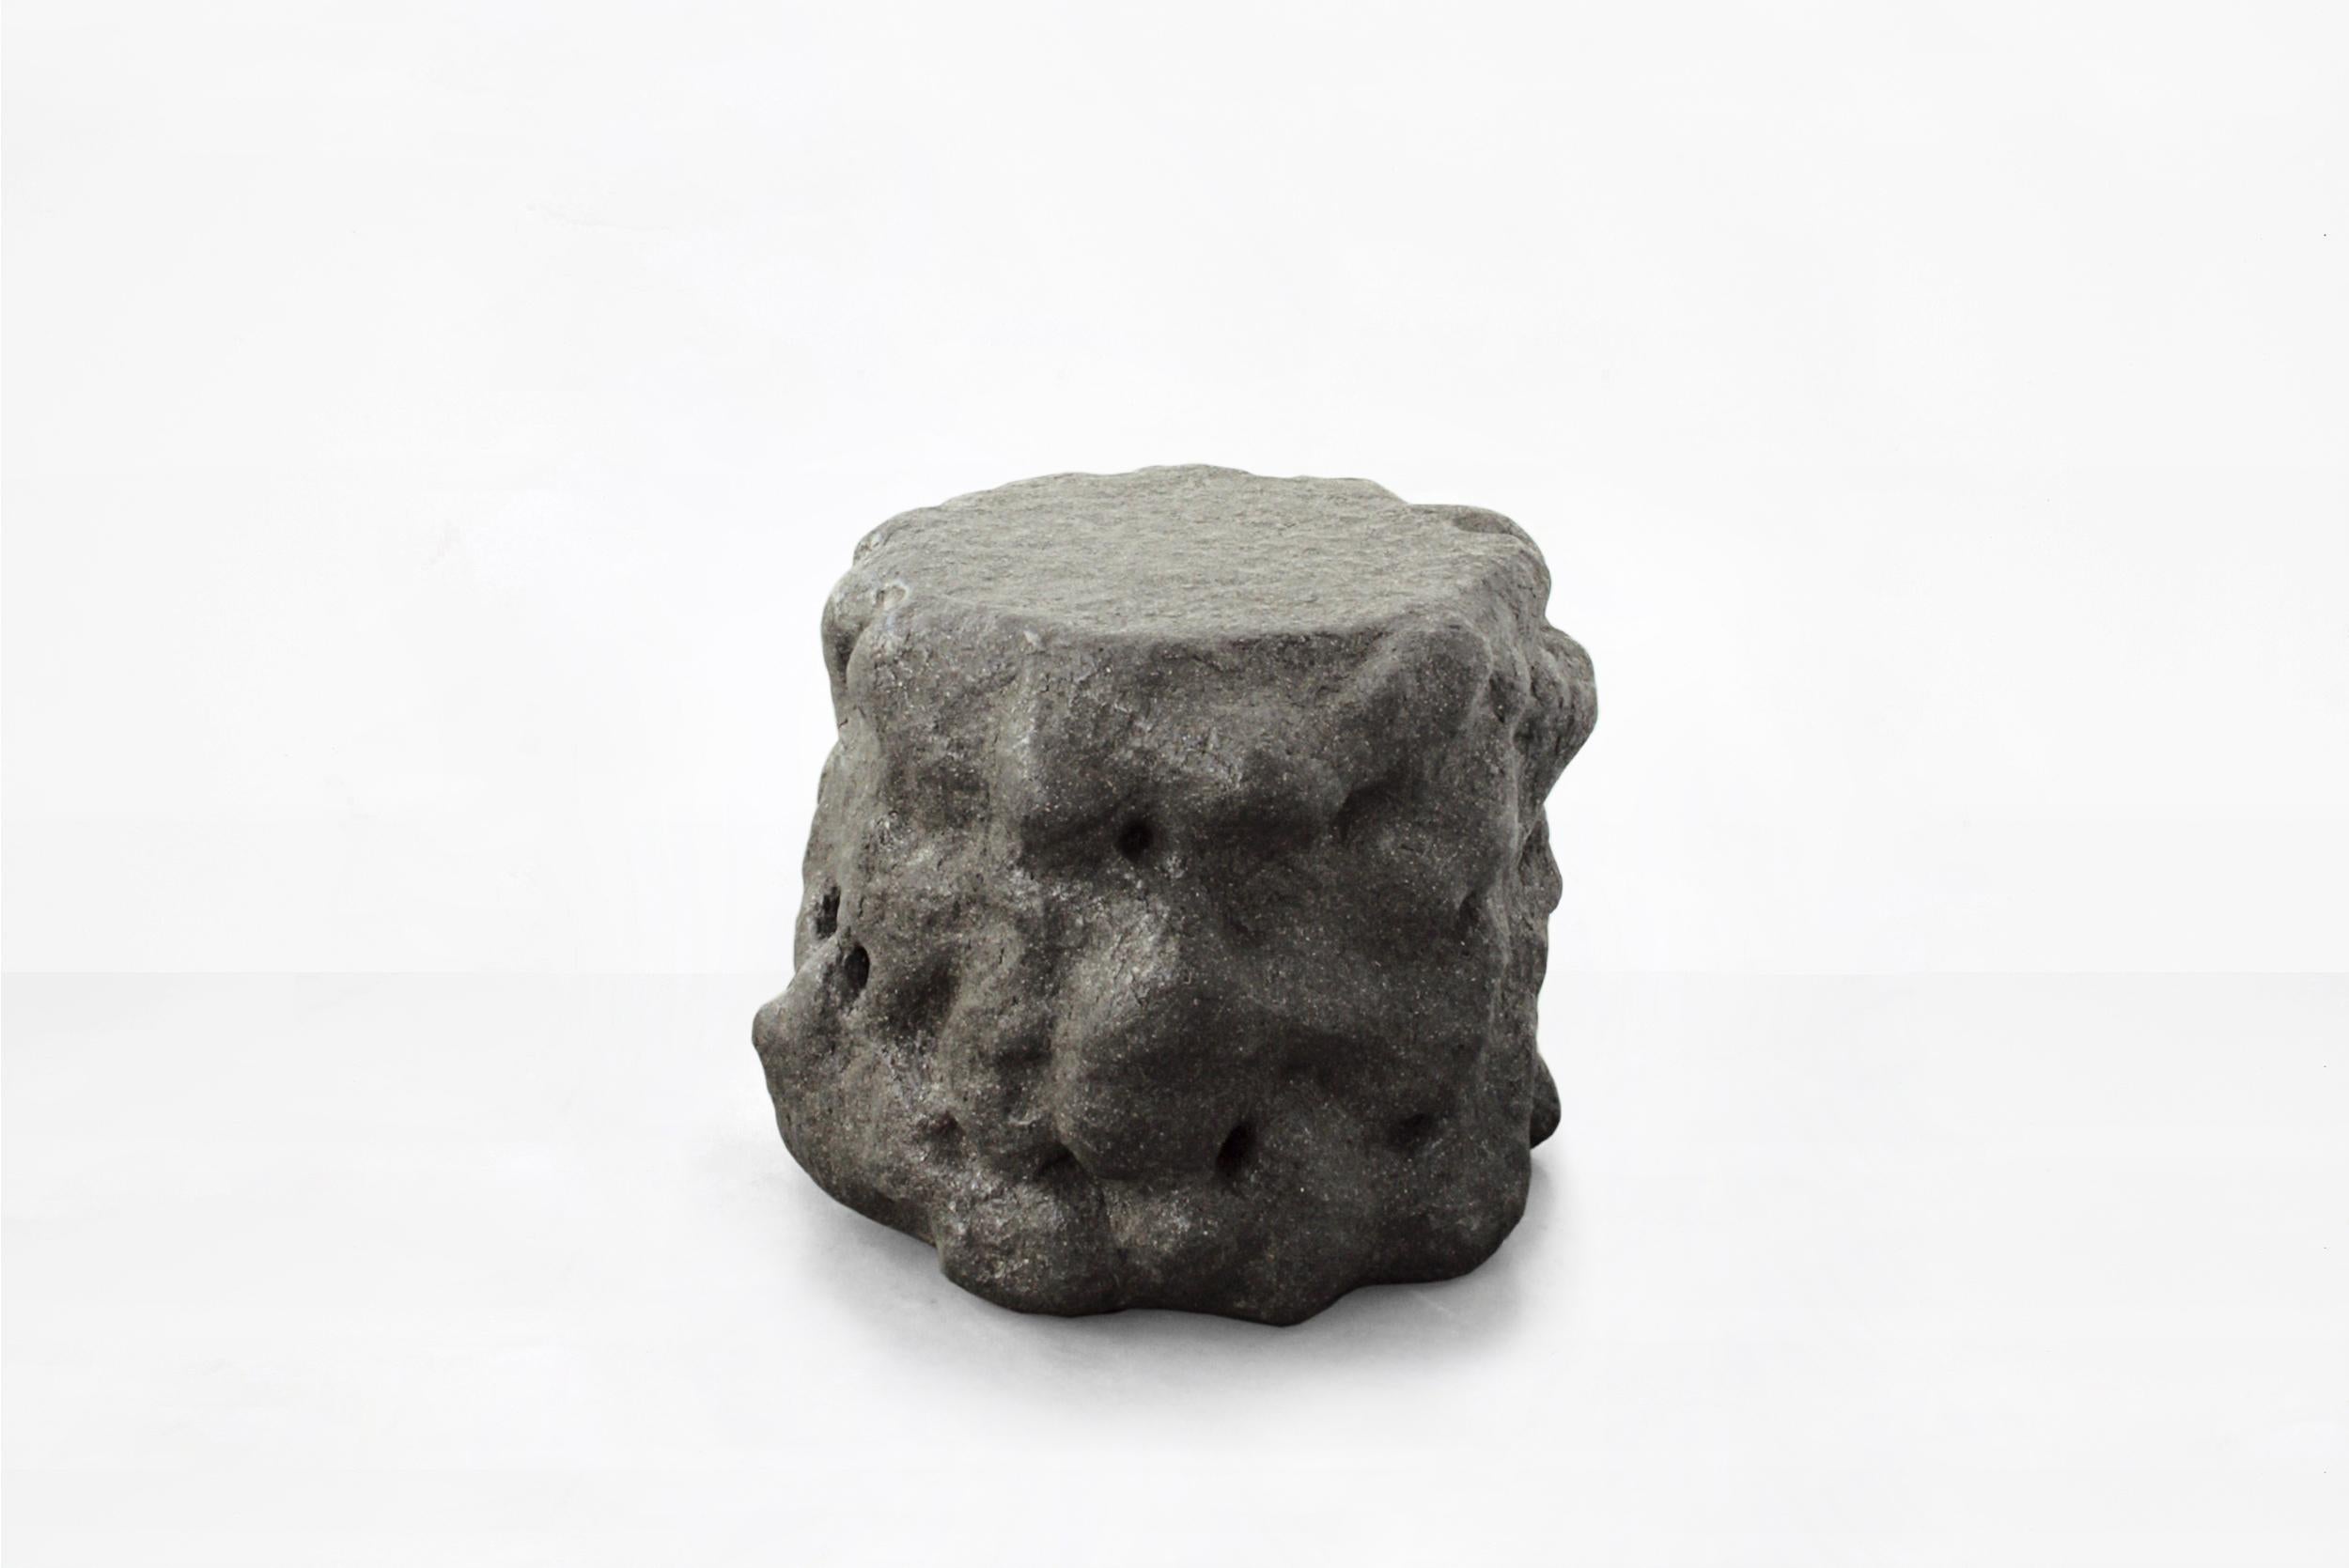 Sigve Knutson Black wood clay stool
Manufactured by Sigve Knutson
Oslo, Norway, 2019
Wood, PVA-glue, Wood dust, polystyrene
Produced for Side Gallery, Barcelona

Measurements:
40 cm x 40 cm x 38 H cm
15.74 in x 15.74 in x 14. 96 H